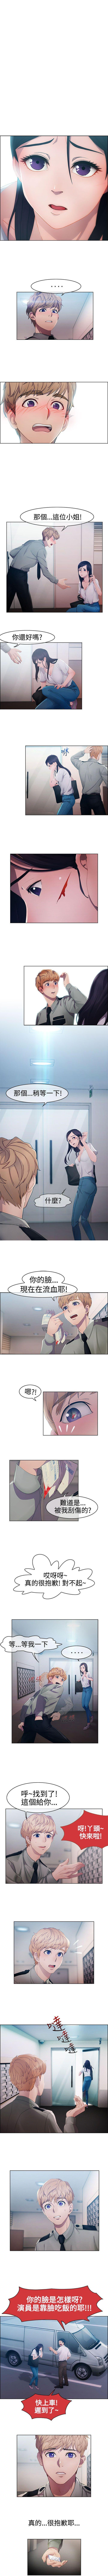 Cheating 淑女花苑 1-80 Gay Spank - Page 5